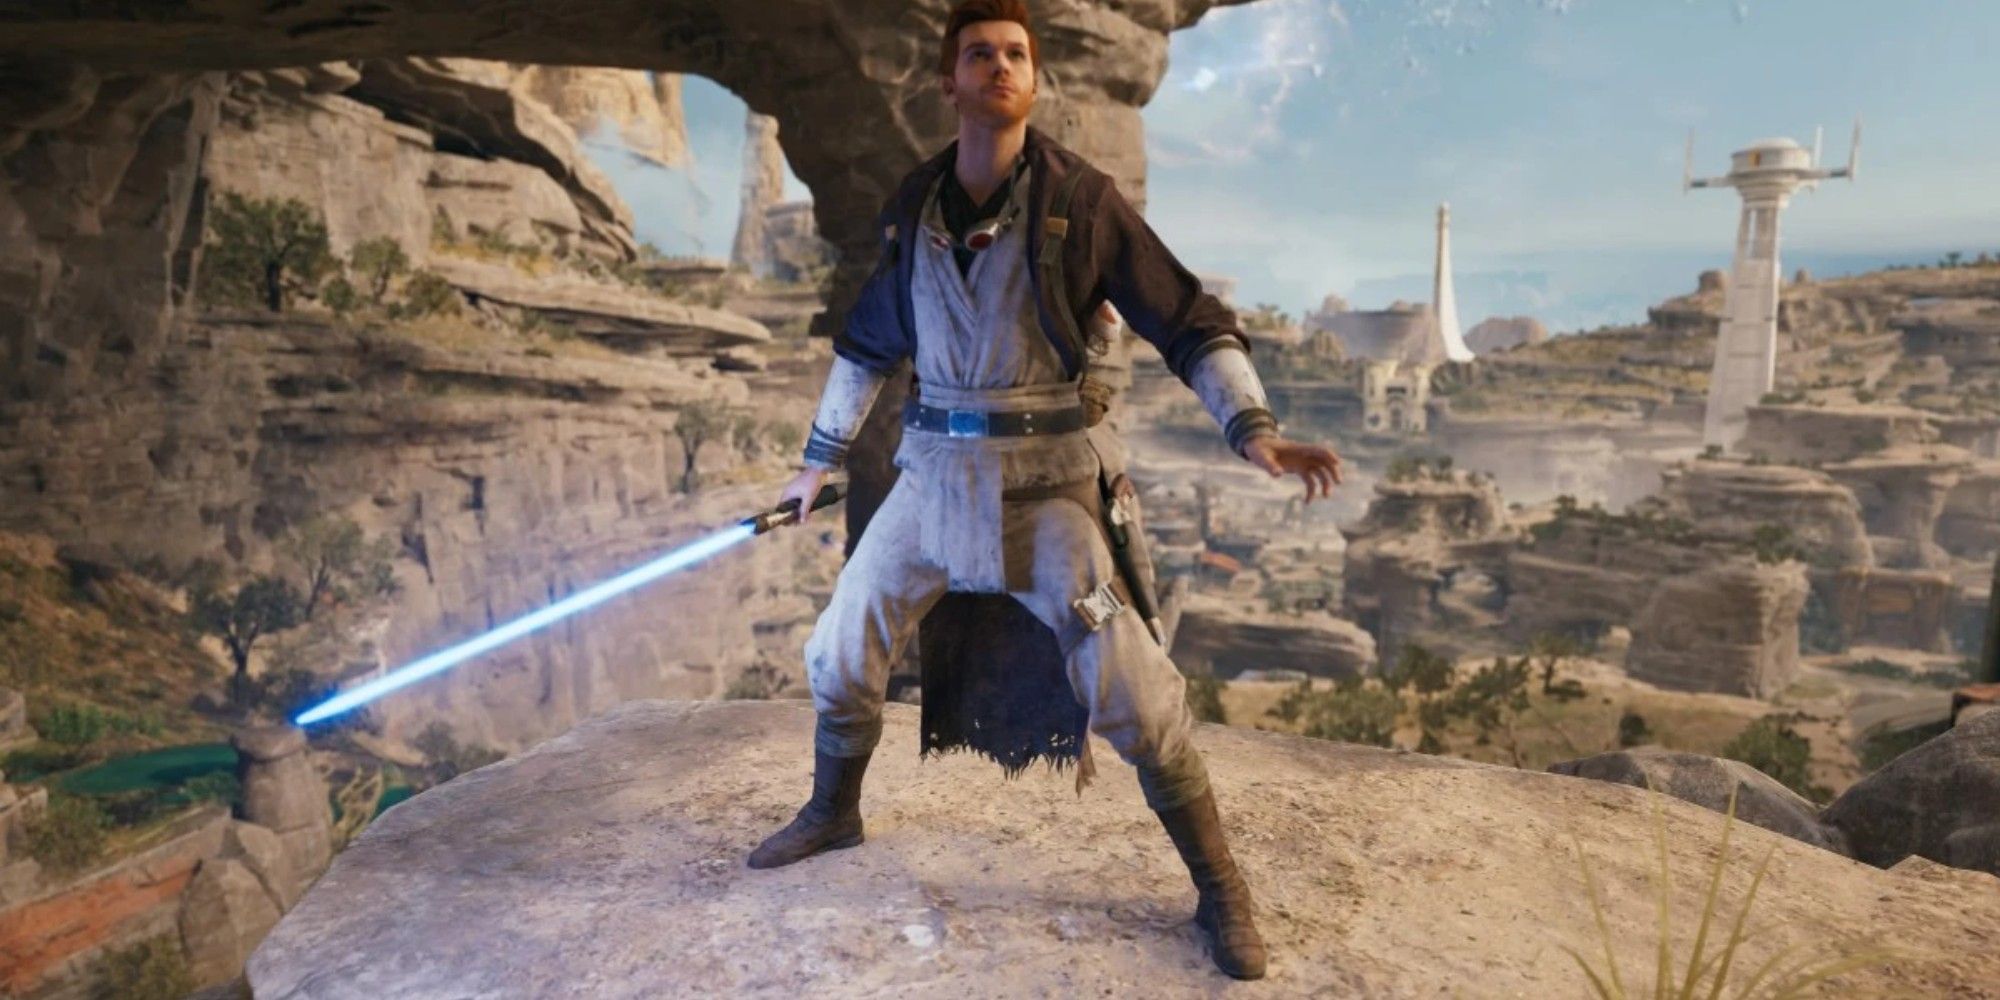 Cal wears the hermit costume with Obi-Wan's lightsaber